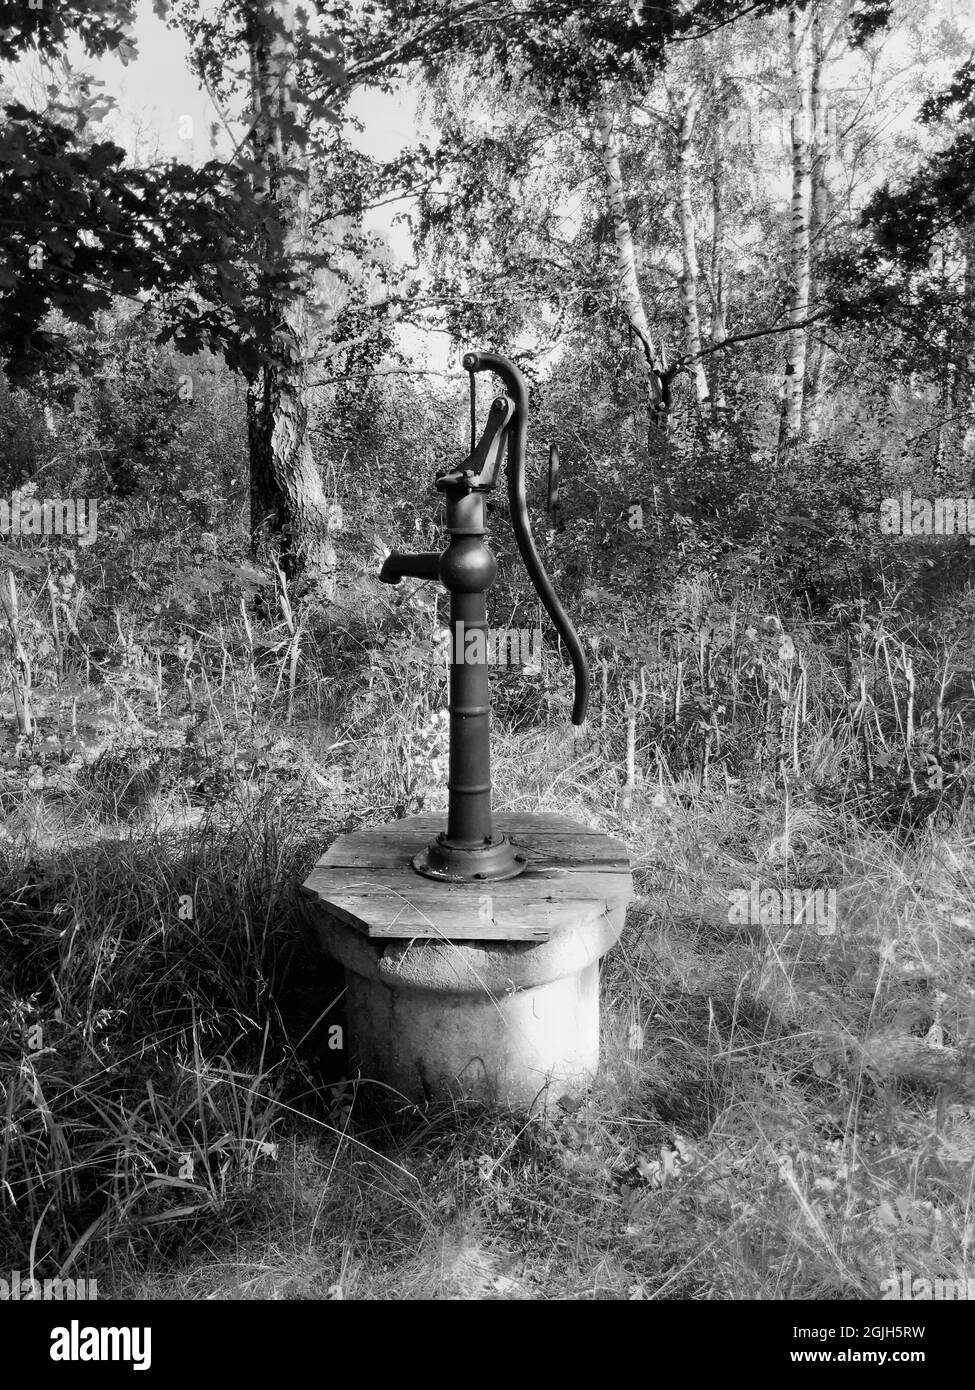 An old fashioned hand powered water pump in a garden in black and